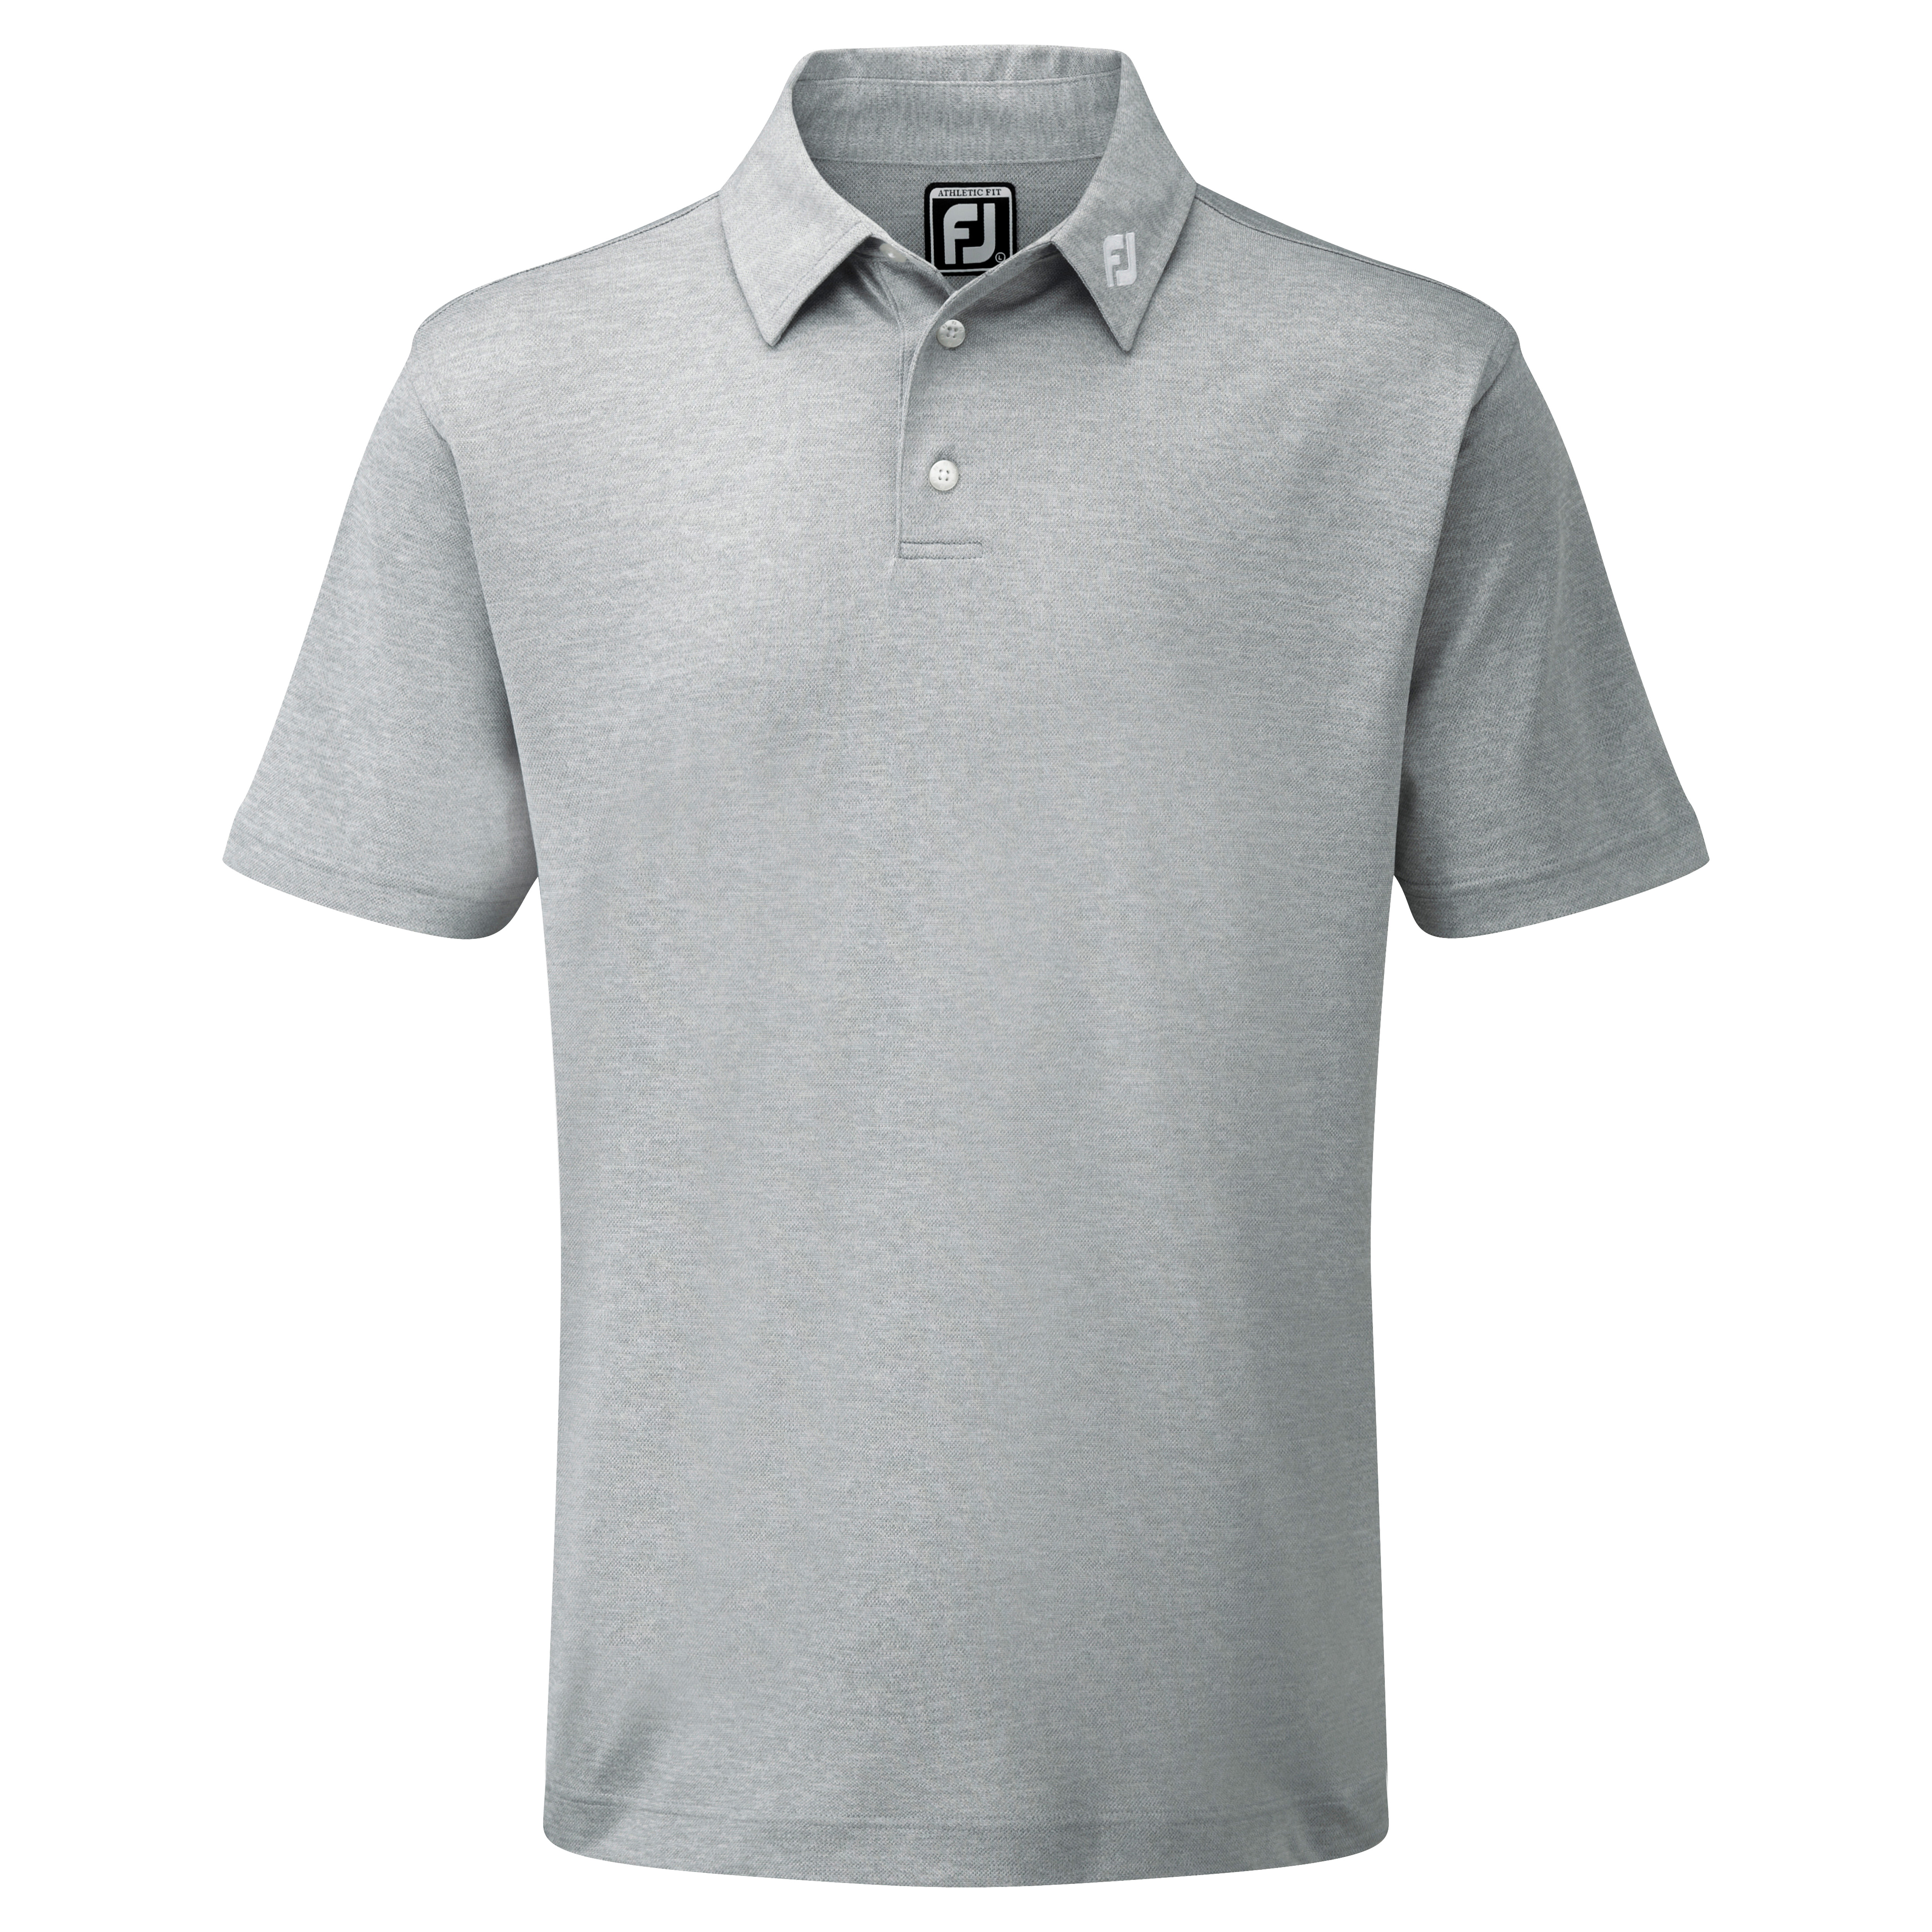 Image of FootJoy Stretch Pique Solid Golf Polo Shirt